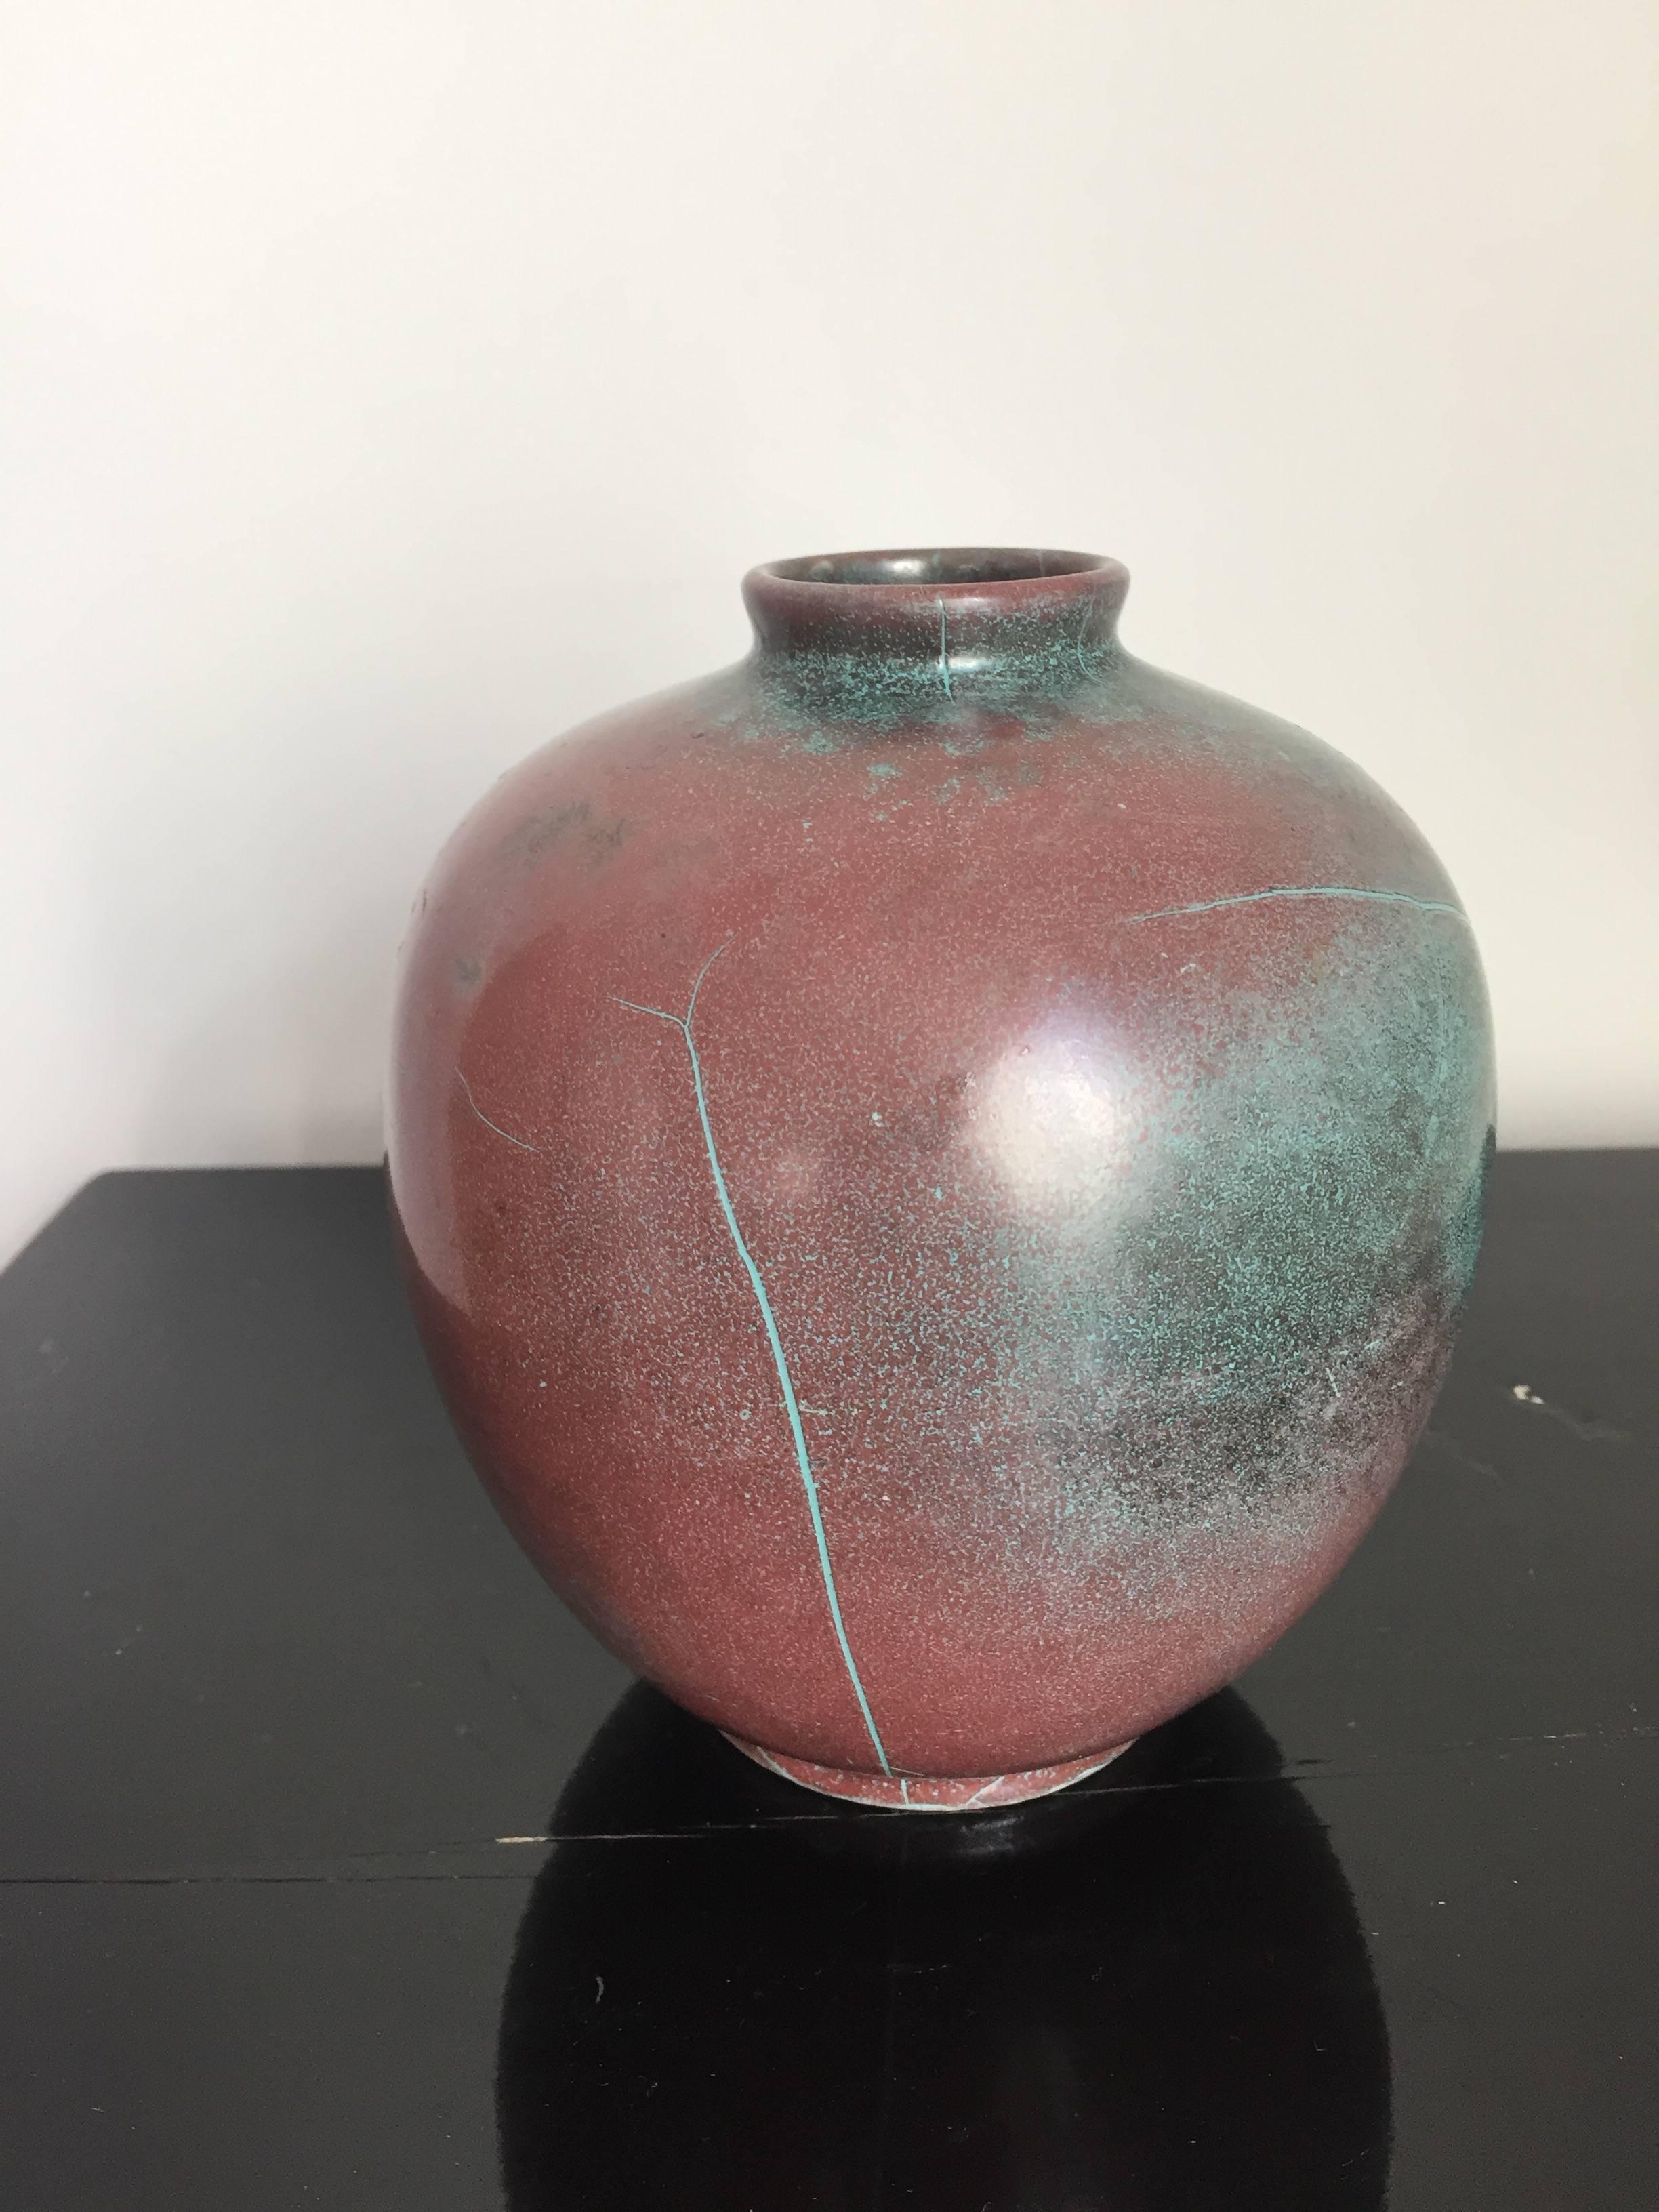 Vase and jar created by Richard Uhlemeyer, German ceramist, beautiful glaze in dark green and terra cotta red shades, 
Vase size 16cm diameter x 16 cm hight
Jar size 16cm diameter x 20cm hight
Good condition, minor losses.

